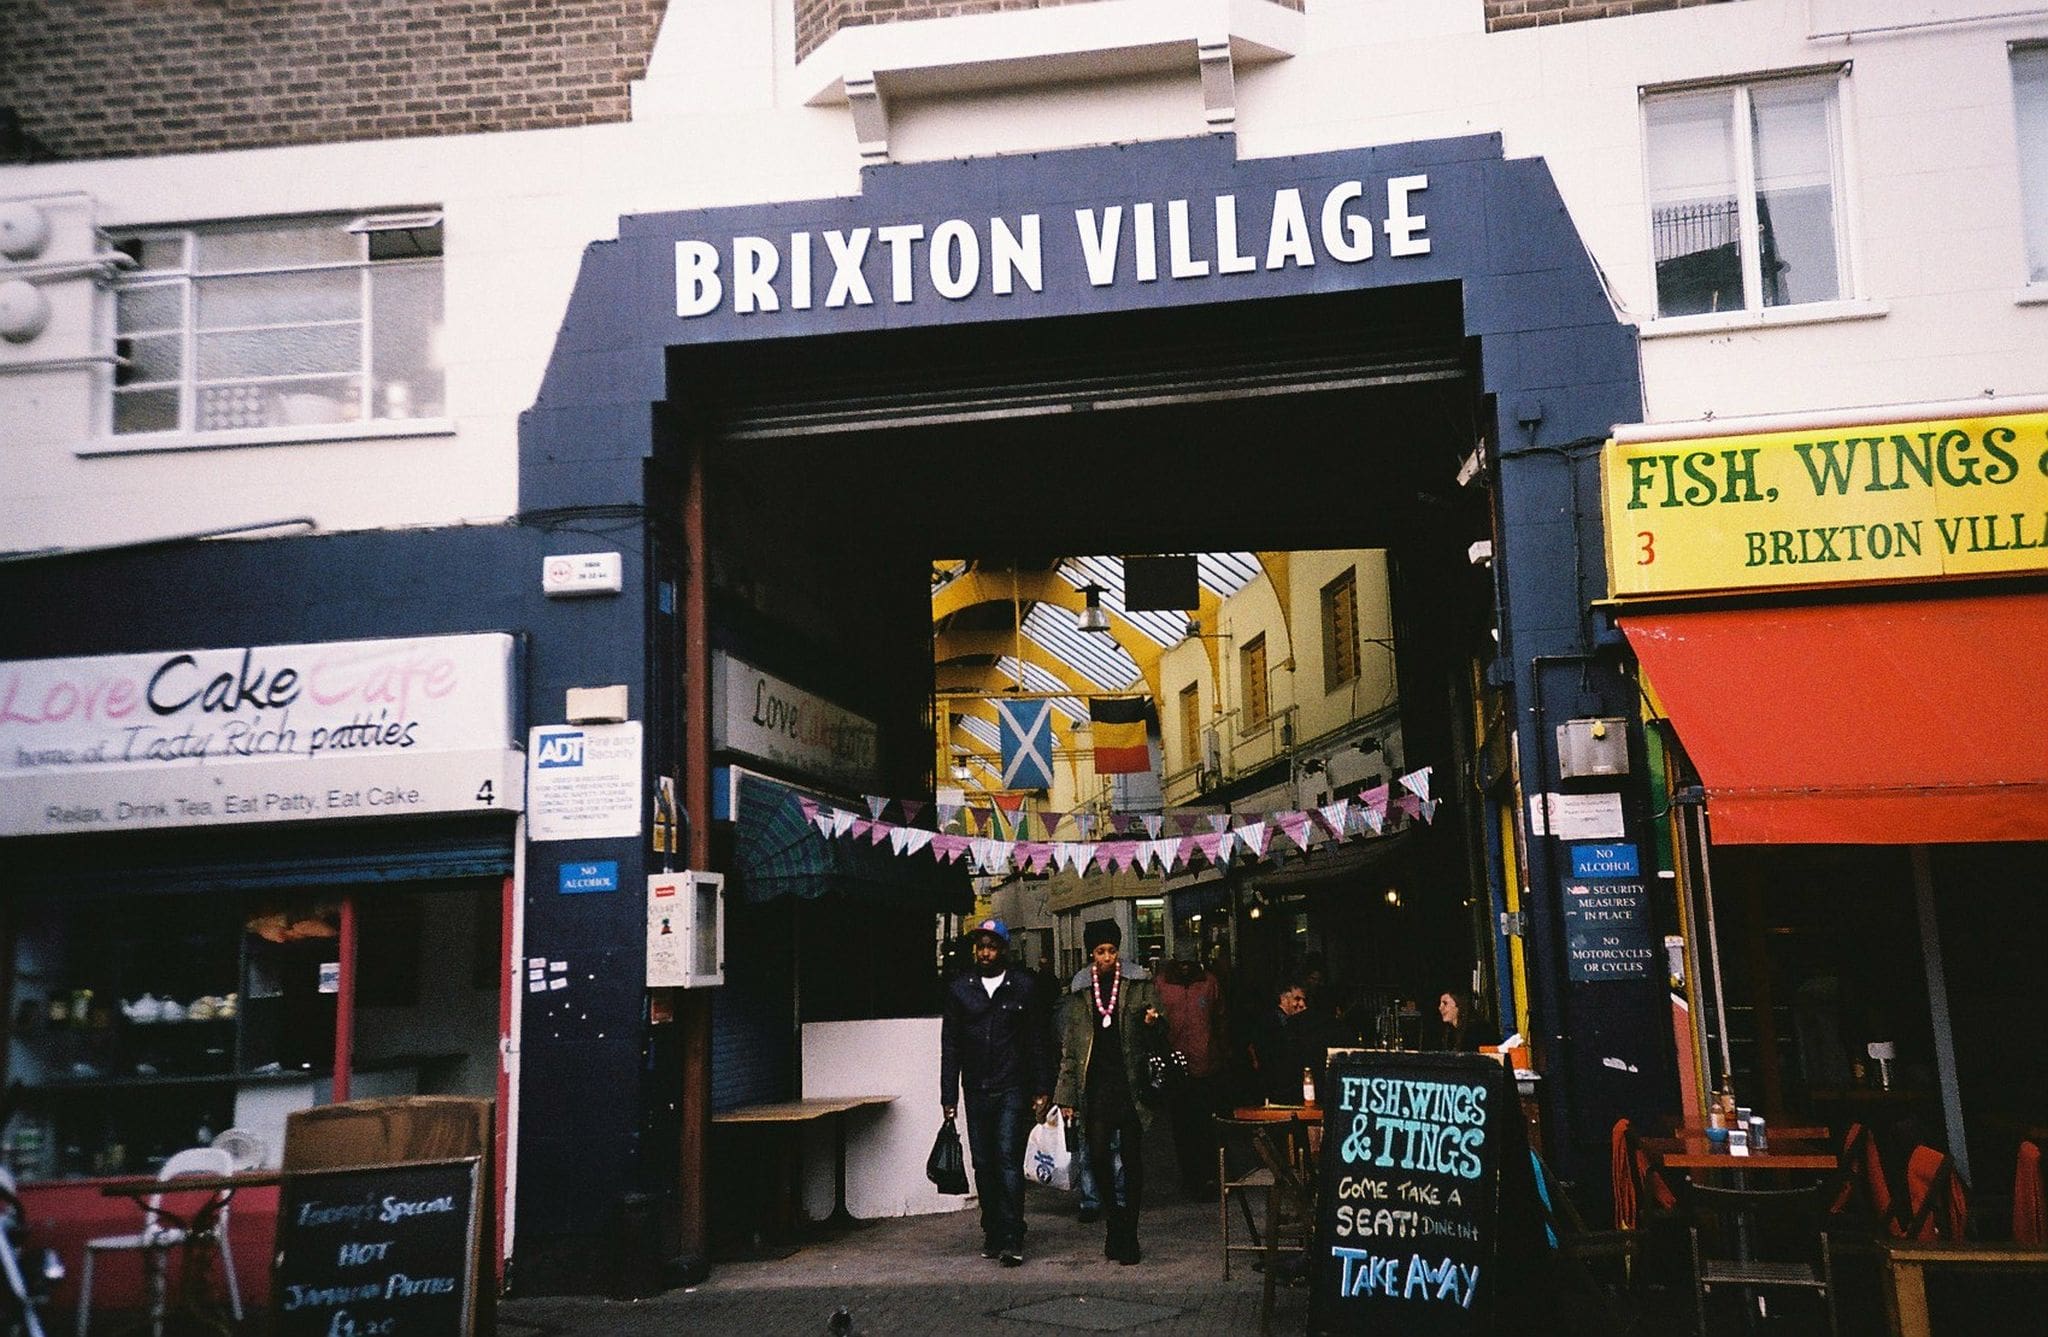 Brixton is an awesome, diverse place to visit in London